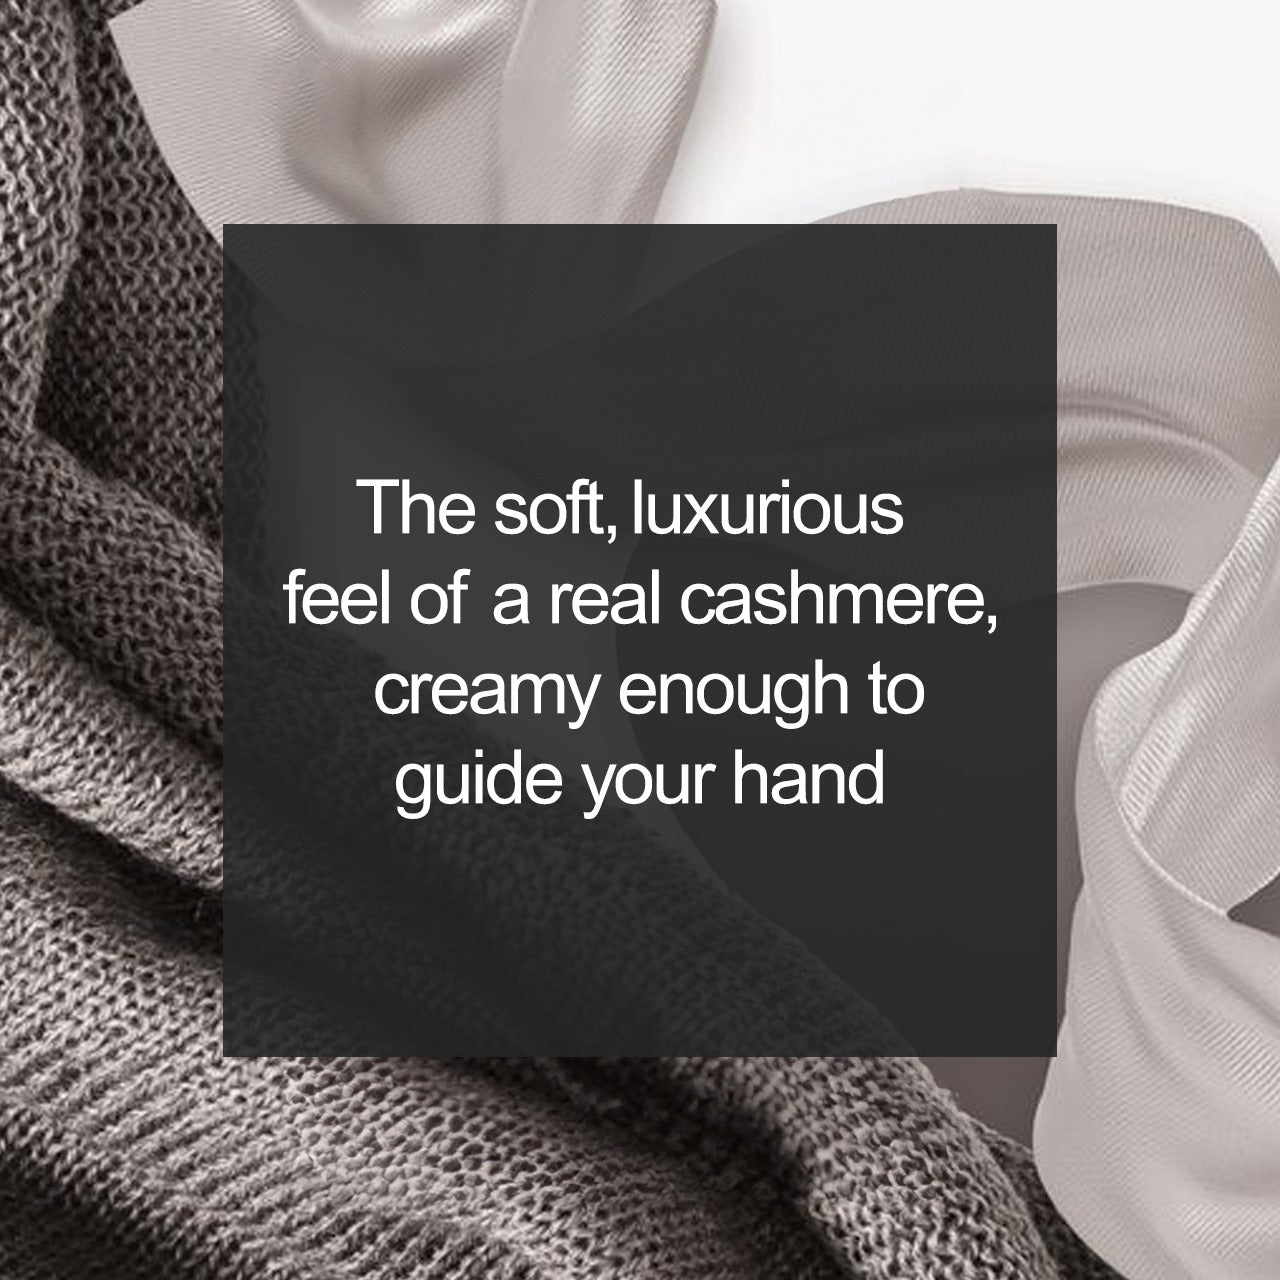 Luxurious Cashmere Large Jar - The soft, luxurious feel of a real cashmere, creamy enough to guide your hand. 